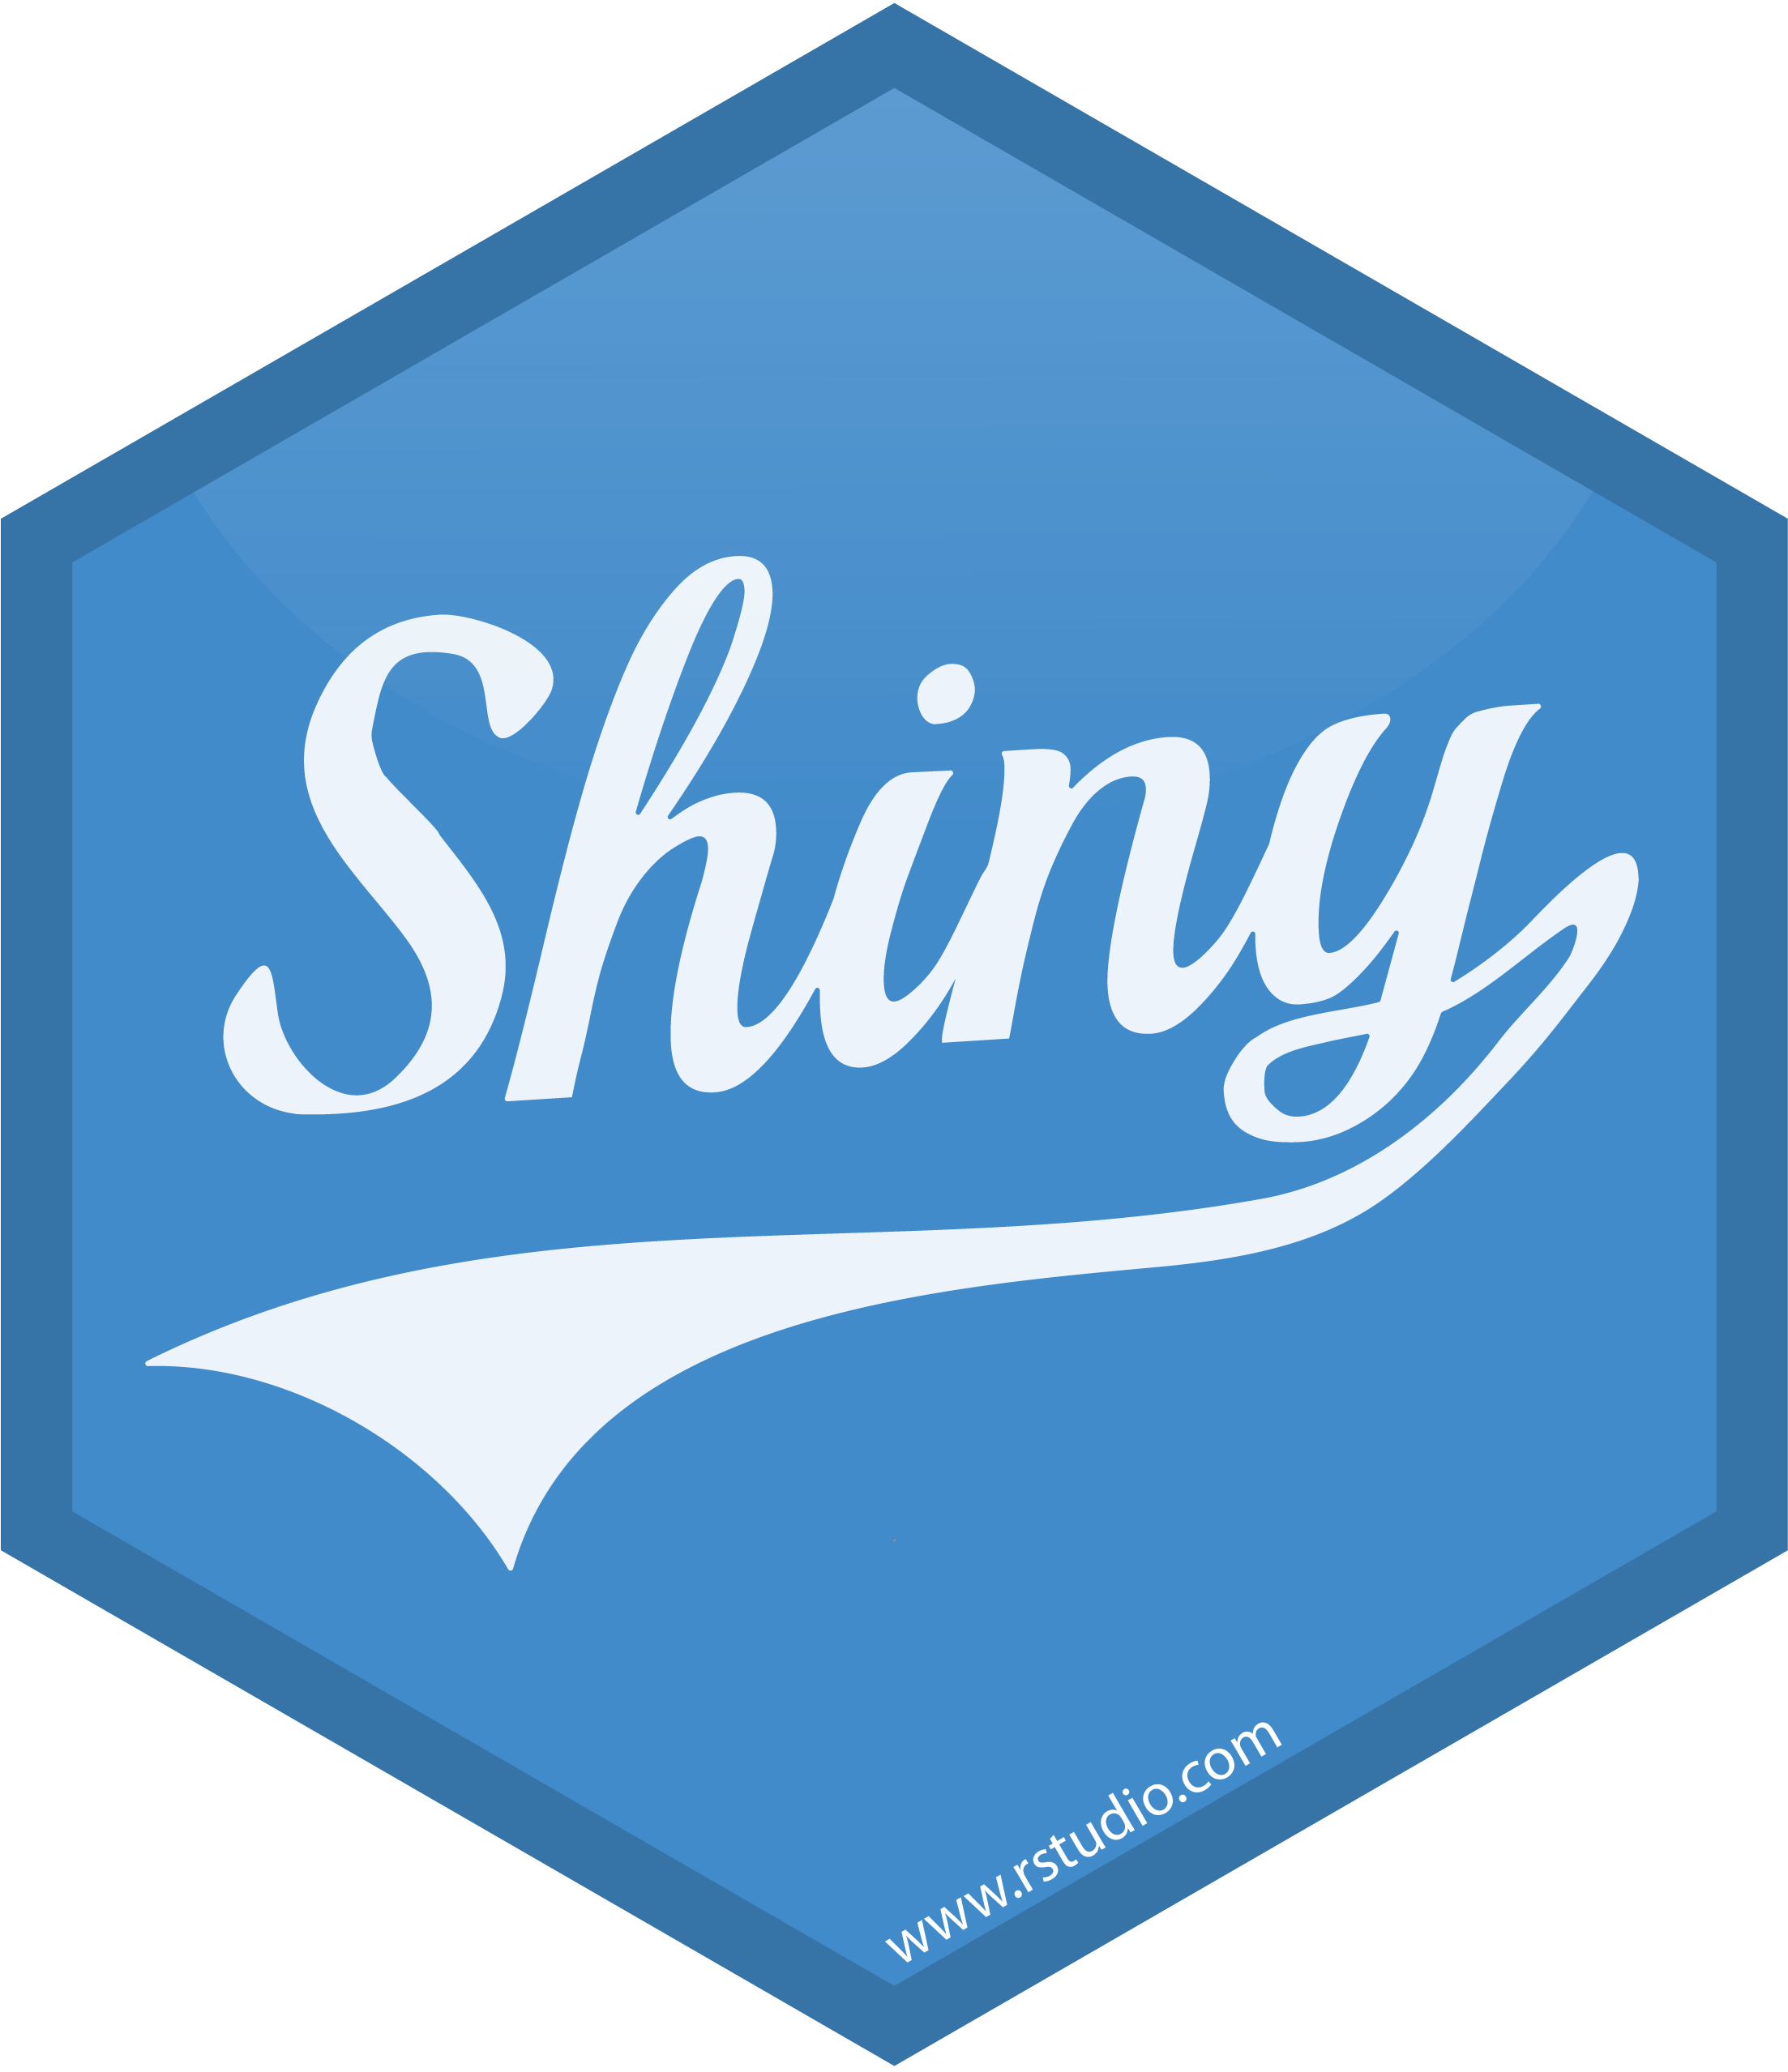 A blue hexagon with the word 'Shiny' written in cursive lettering across the center